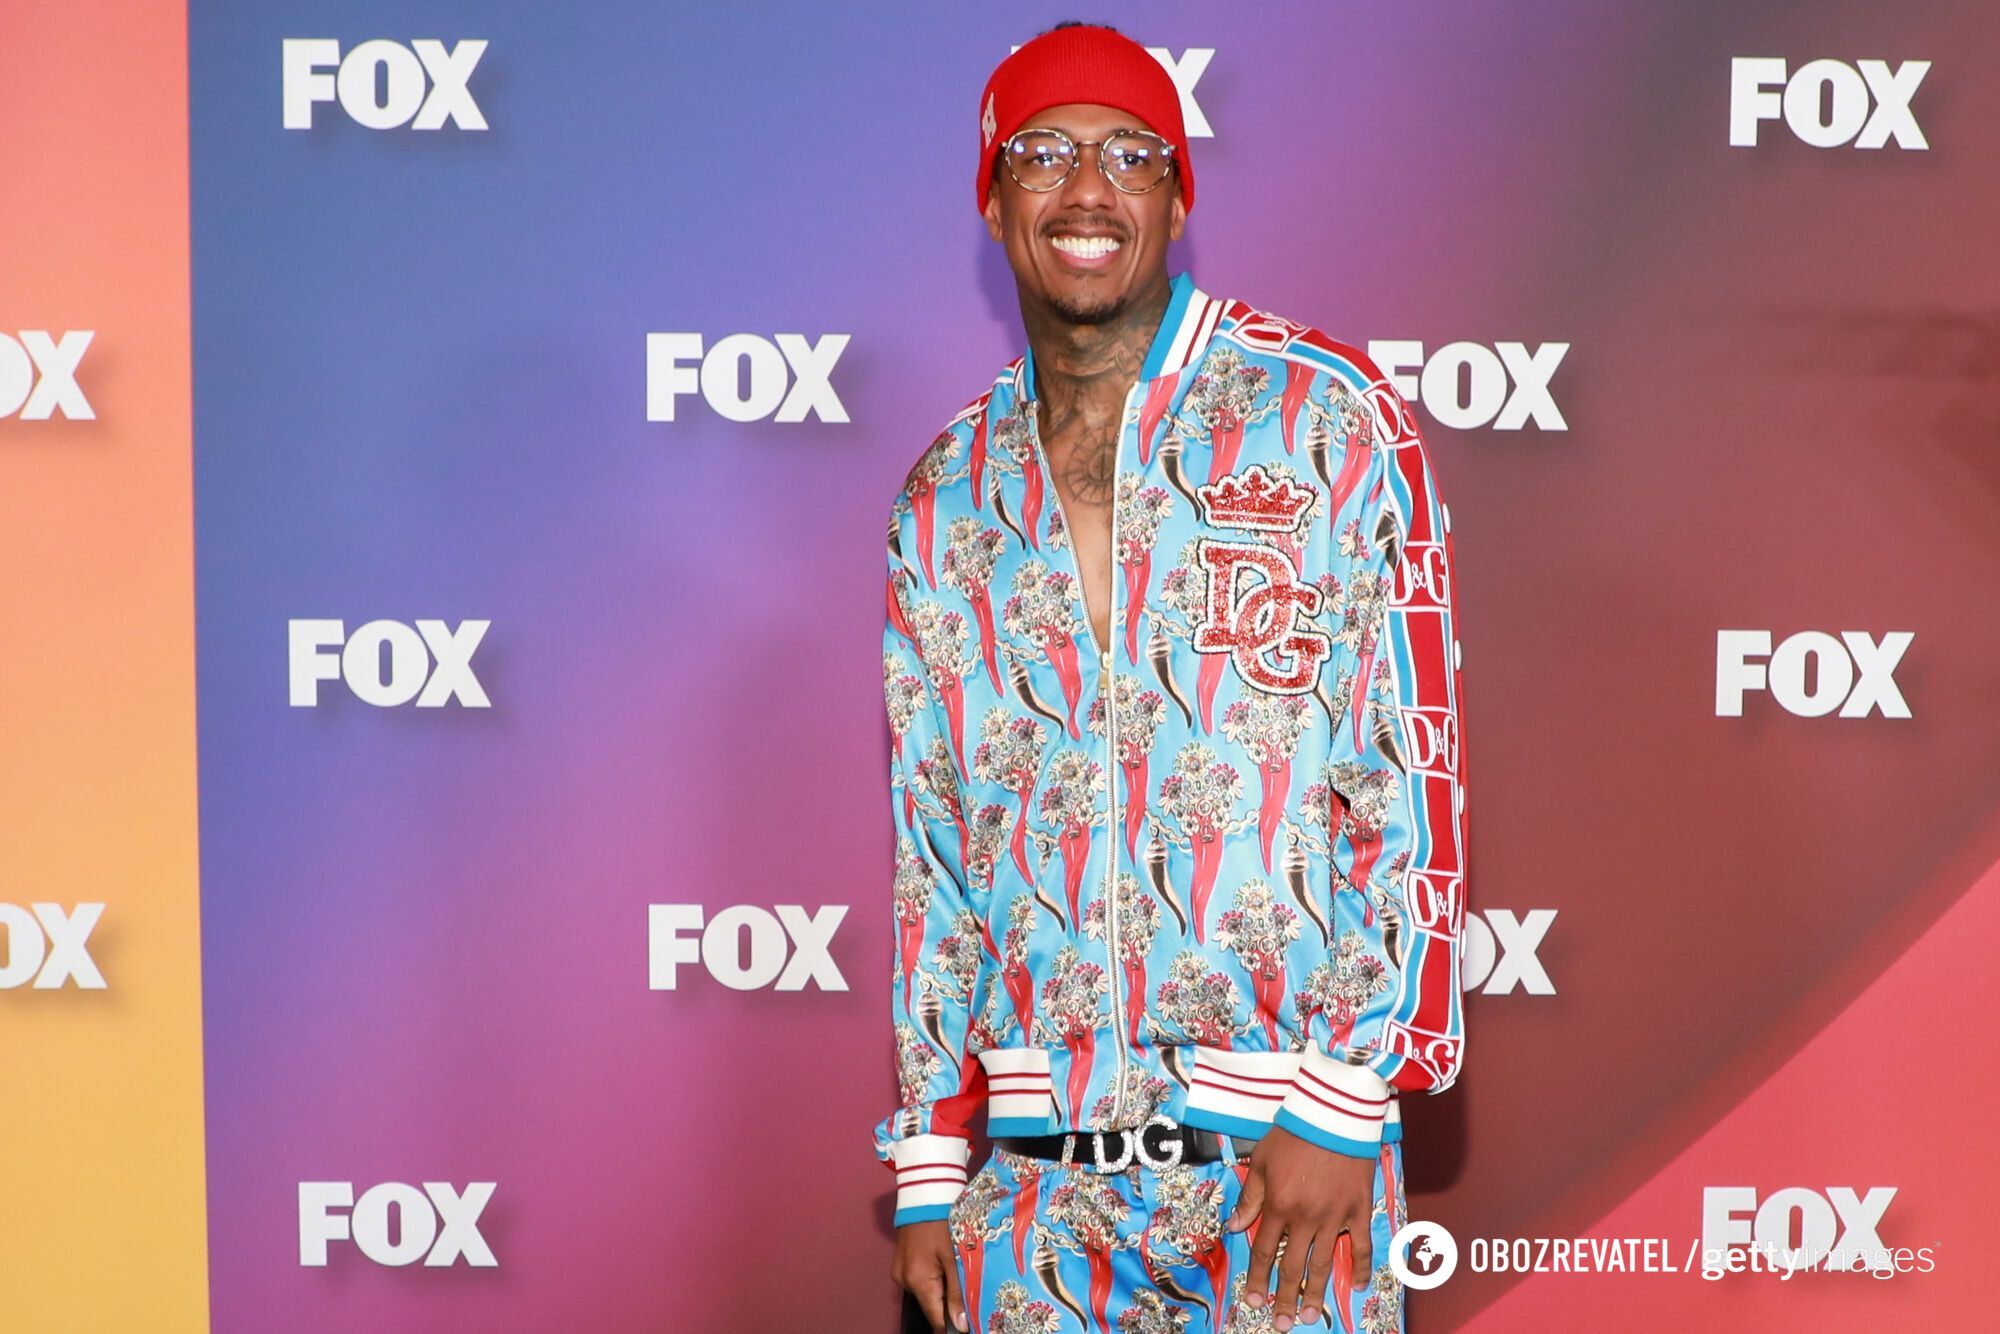 12 children from different women. American comedian Nick Cannon insured his genitals for $10 million